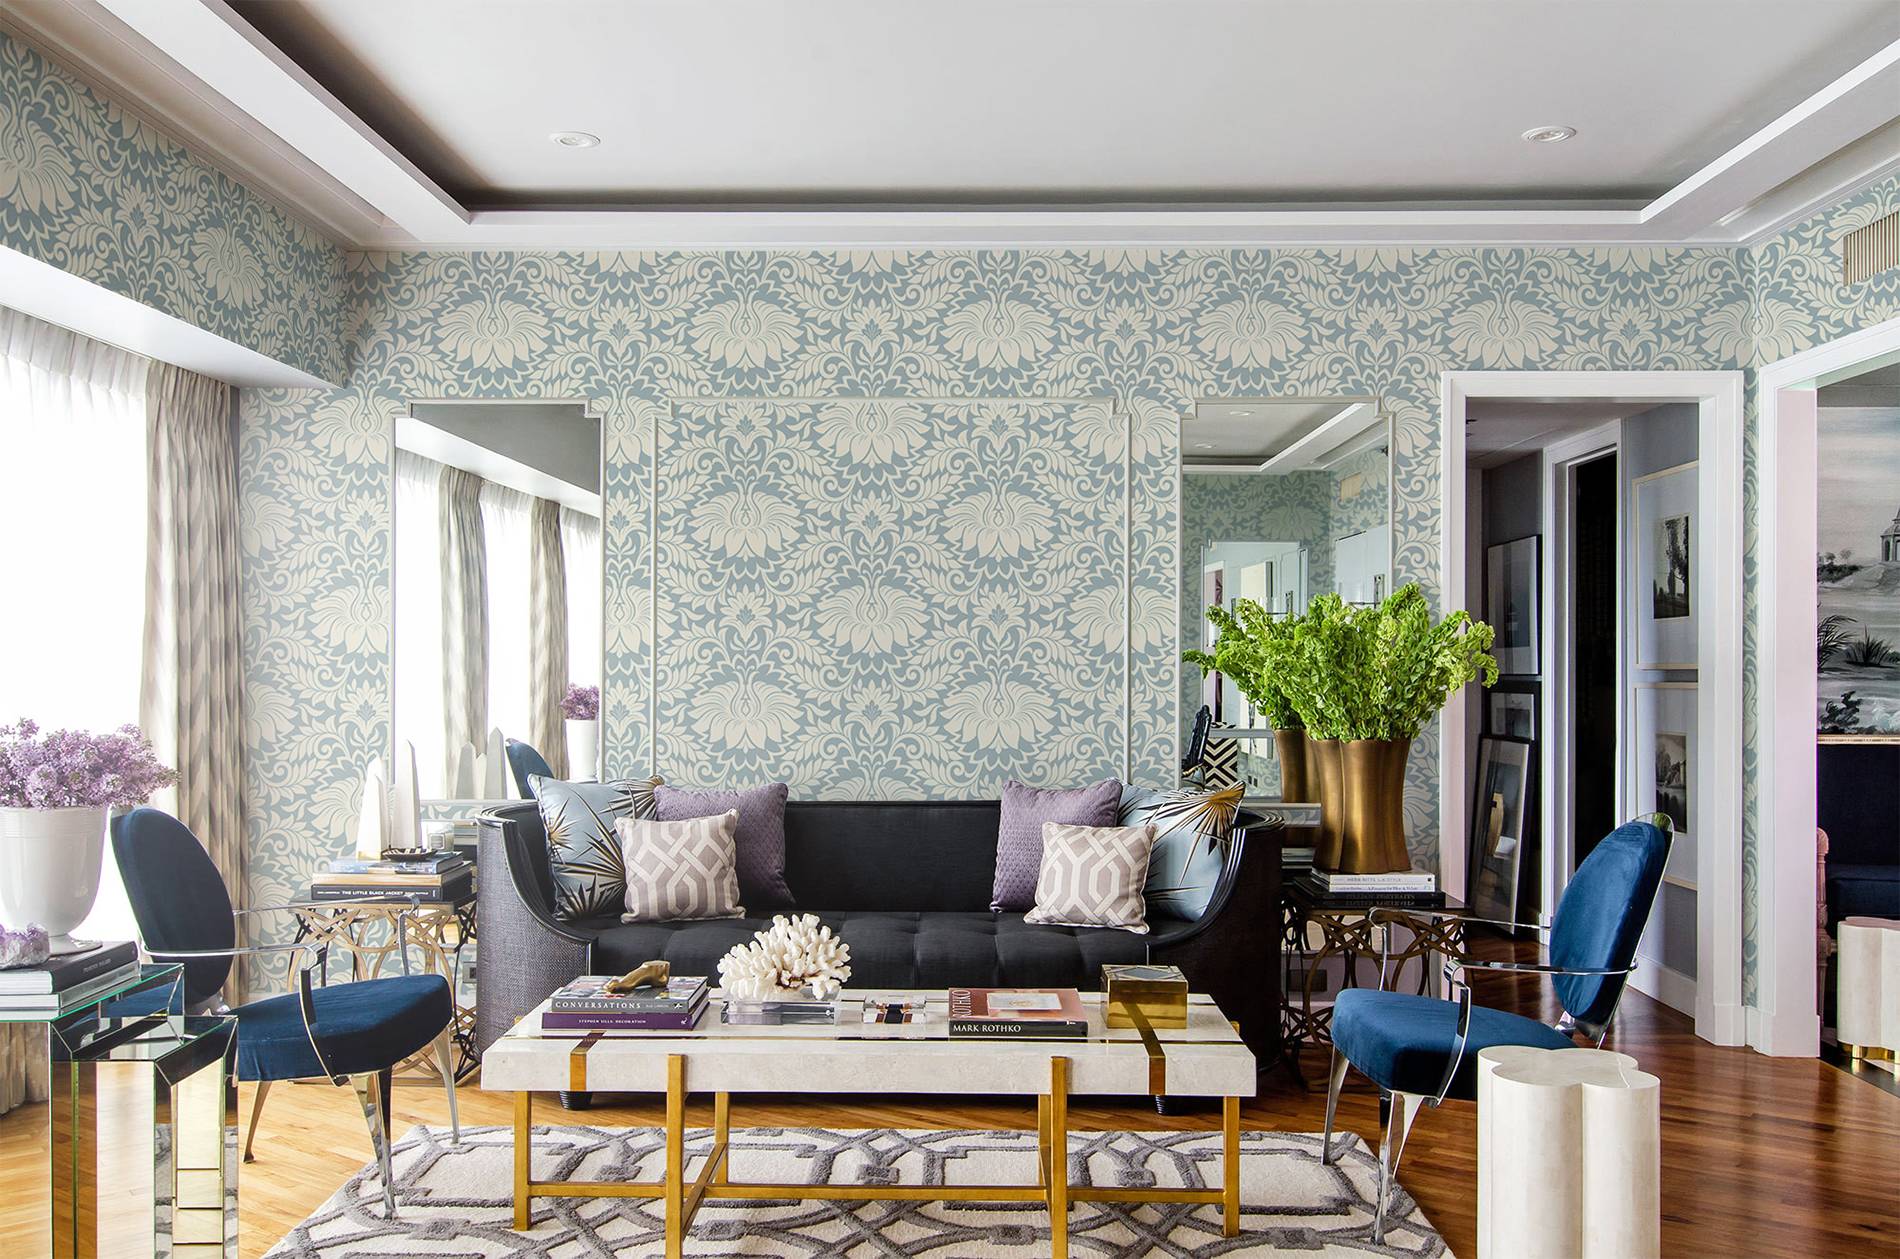 Classic glamour • Glamour - Living room - Textures and patterns - Wall Murals